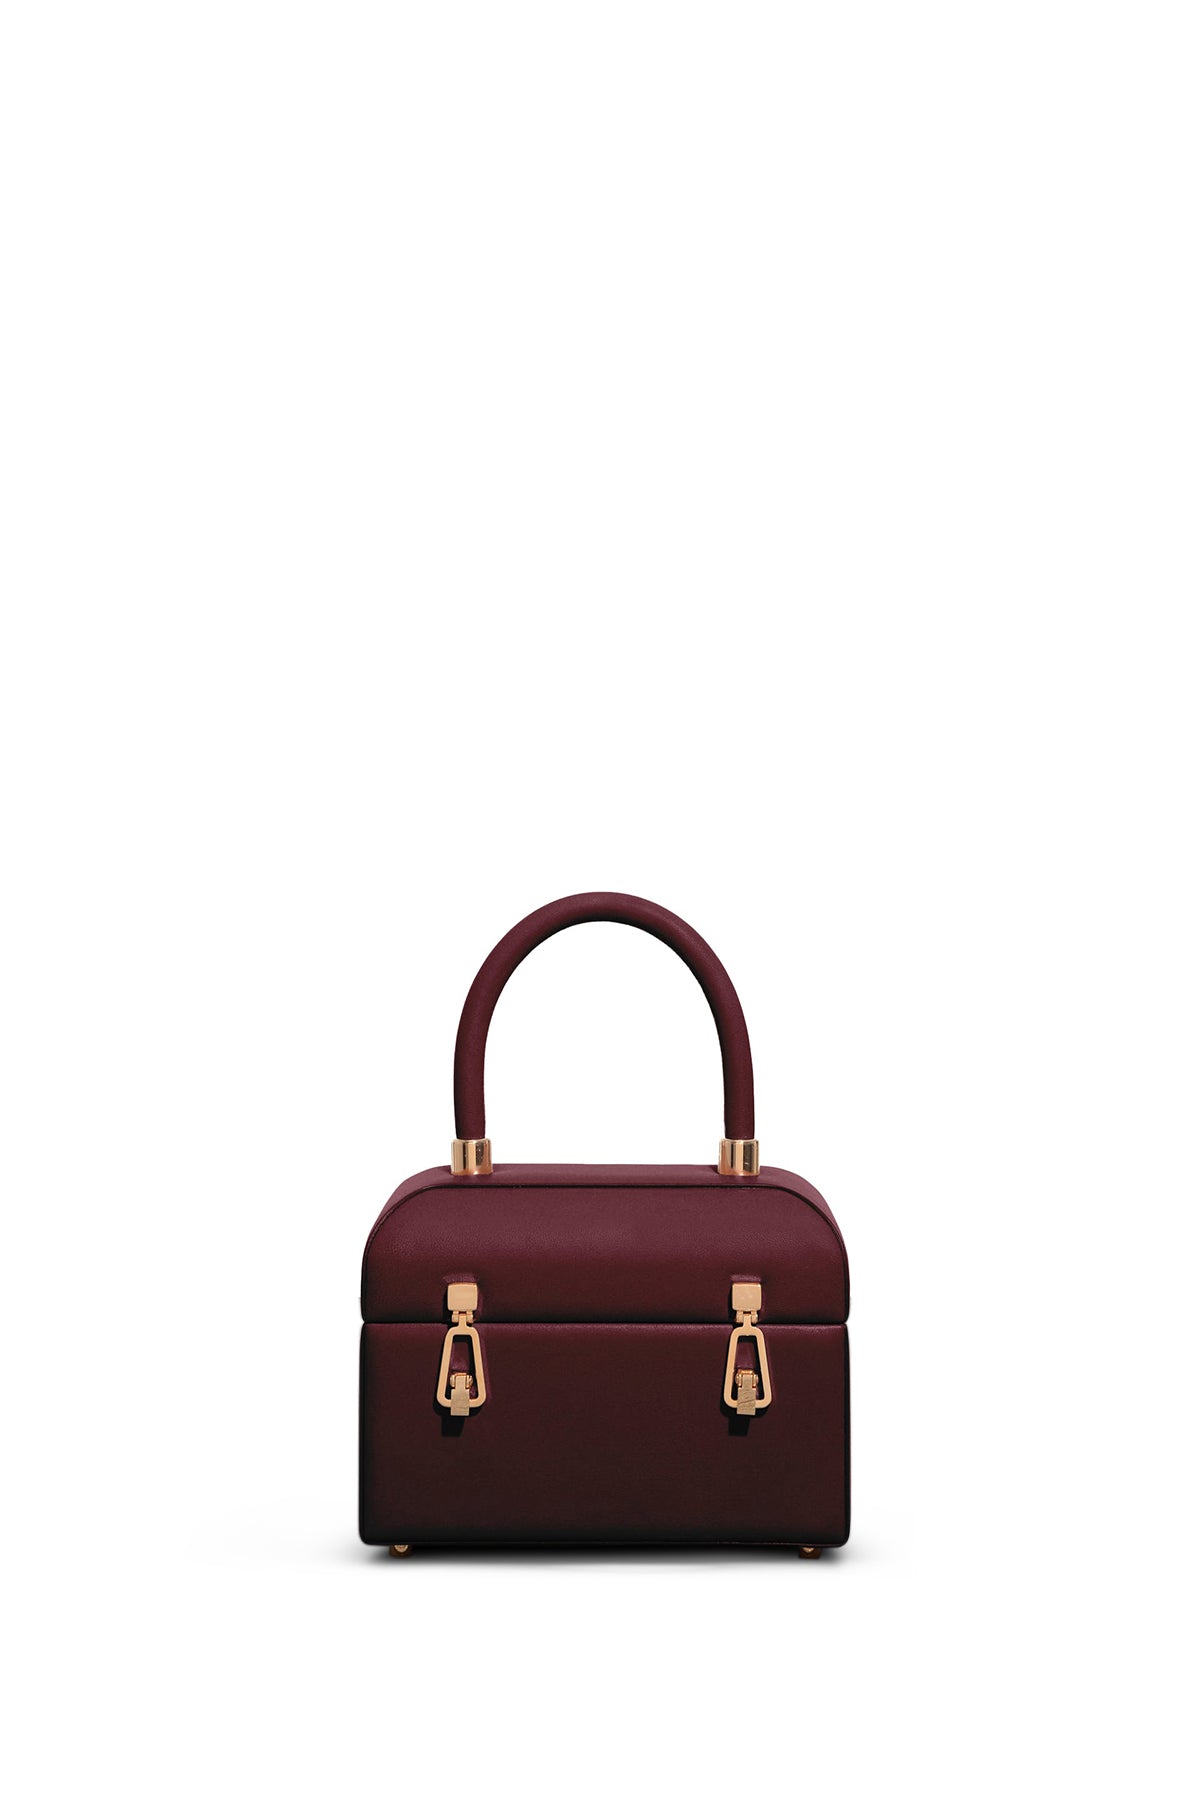 Patsy Bag in Bordeaux Nappa Leather